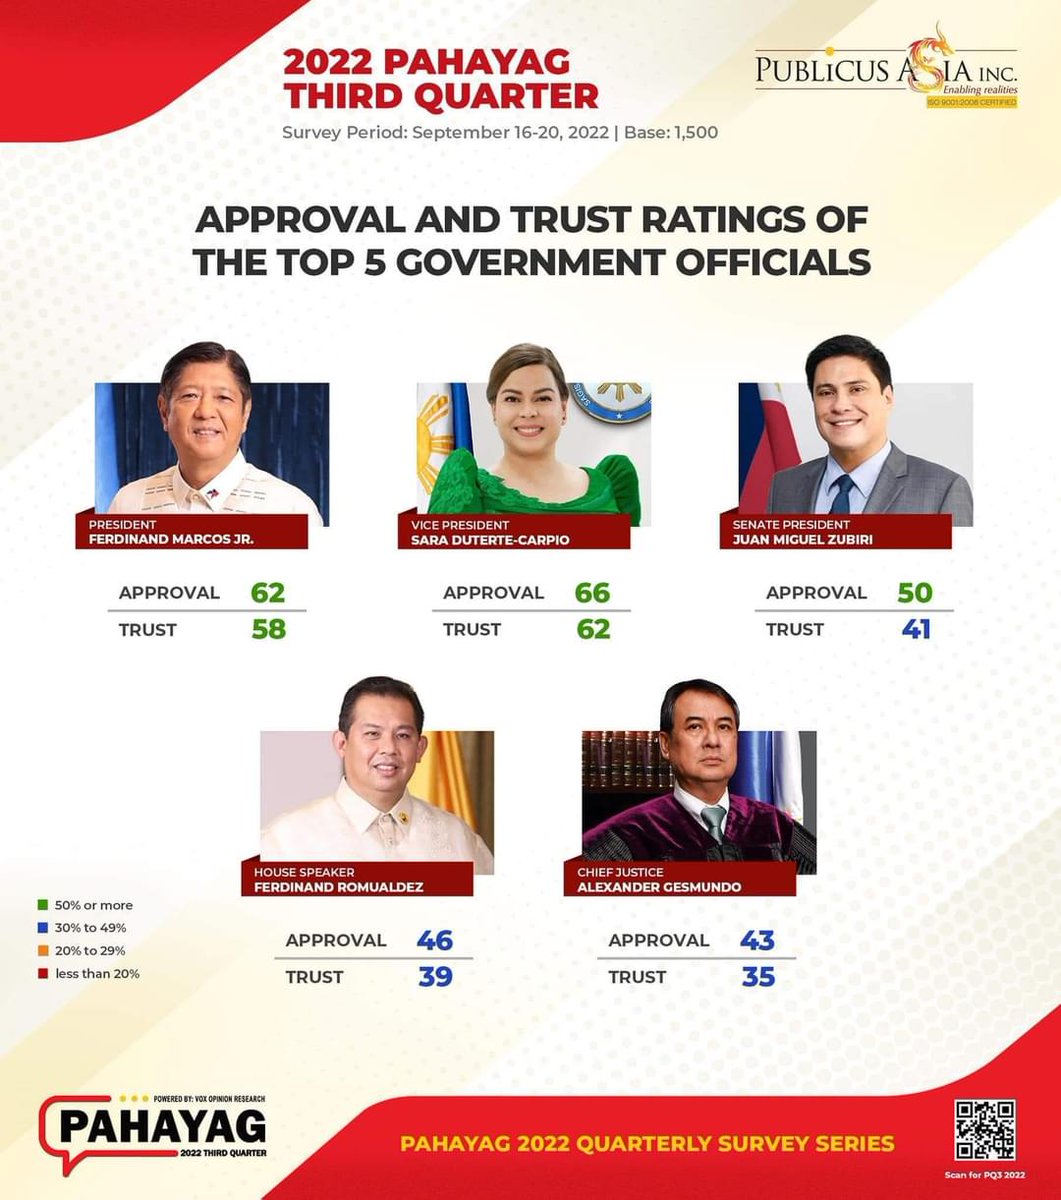 Approval and trust ratings of goverenment officials 

#MahalinNatinAngPilipinas